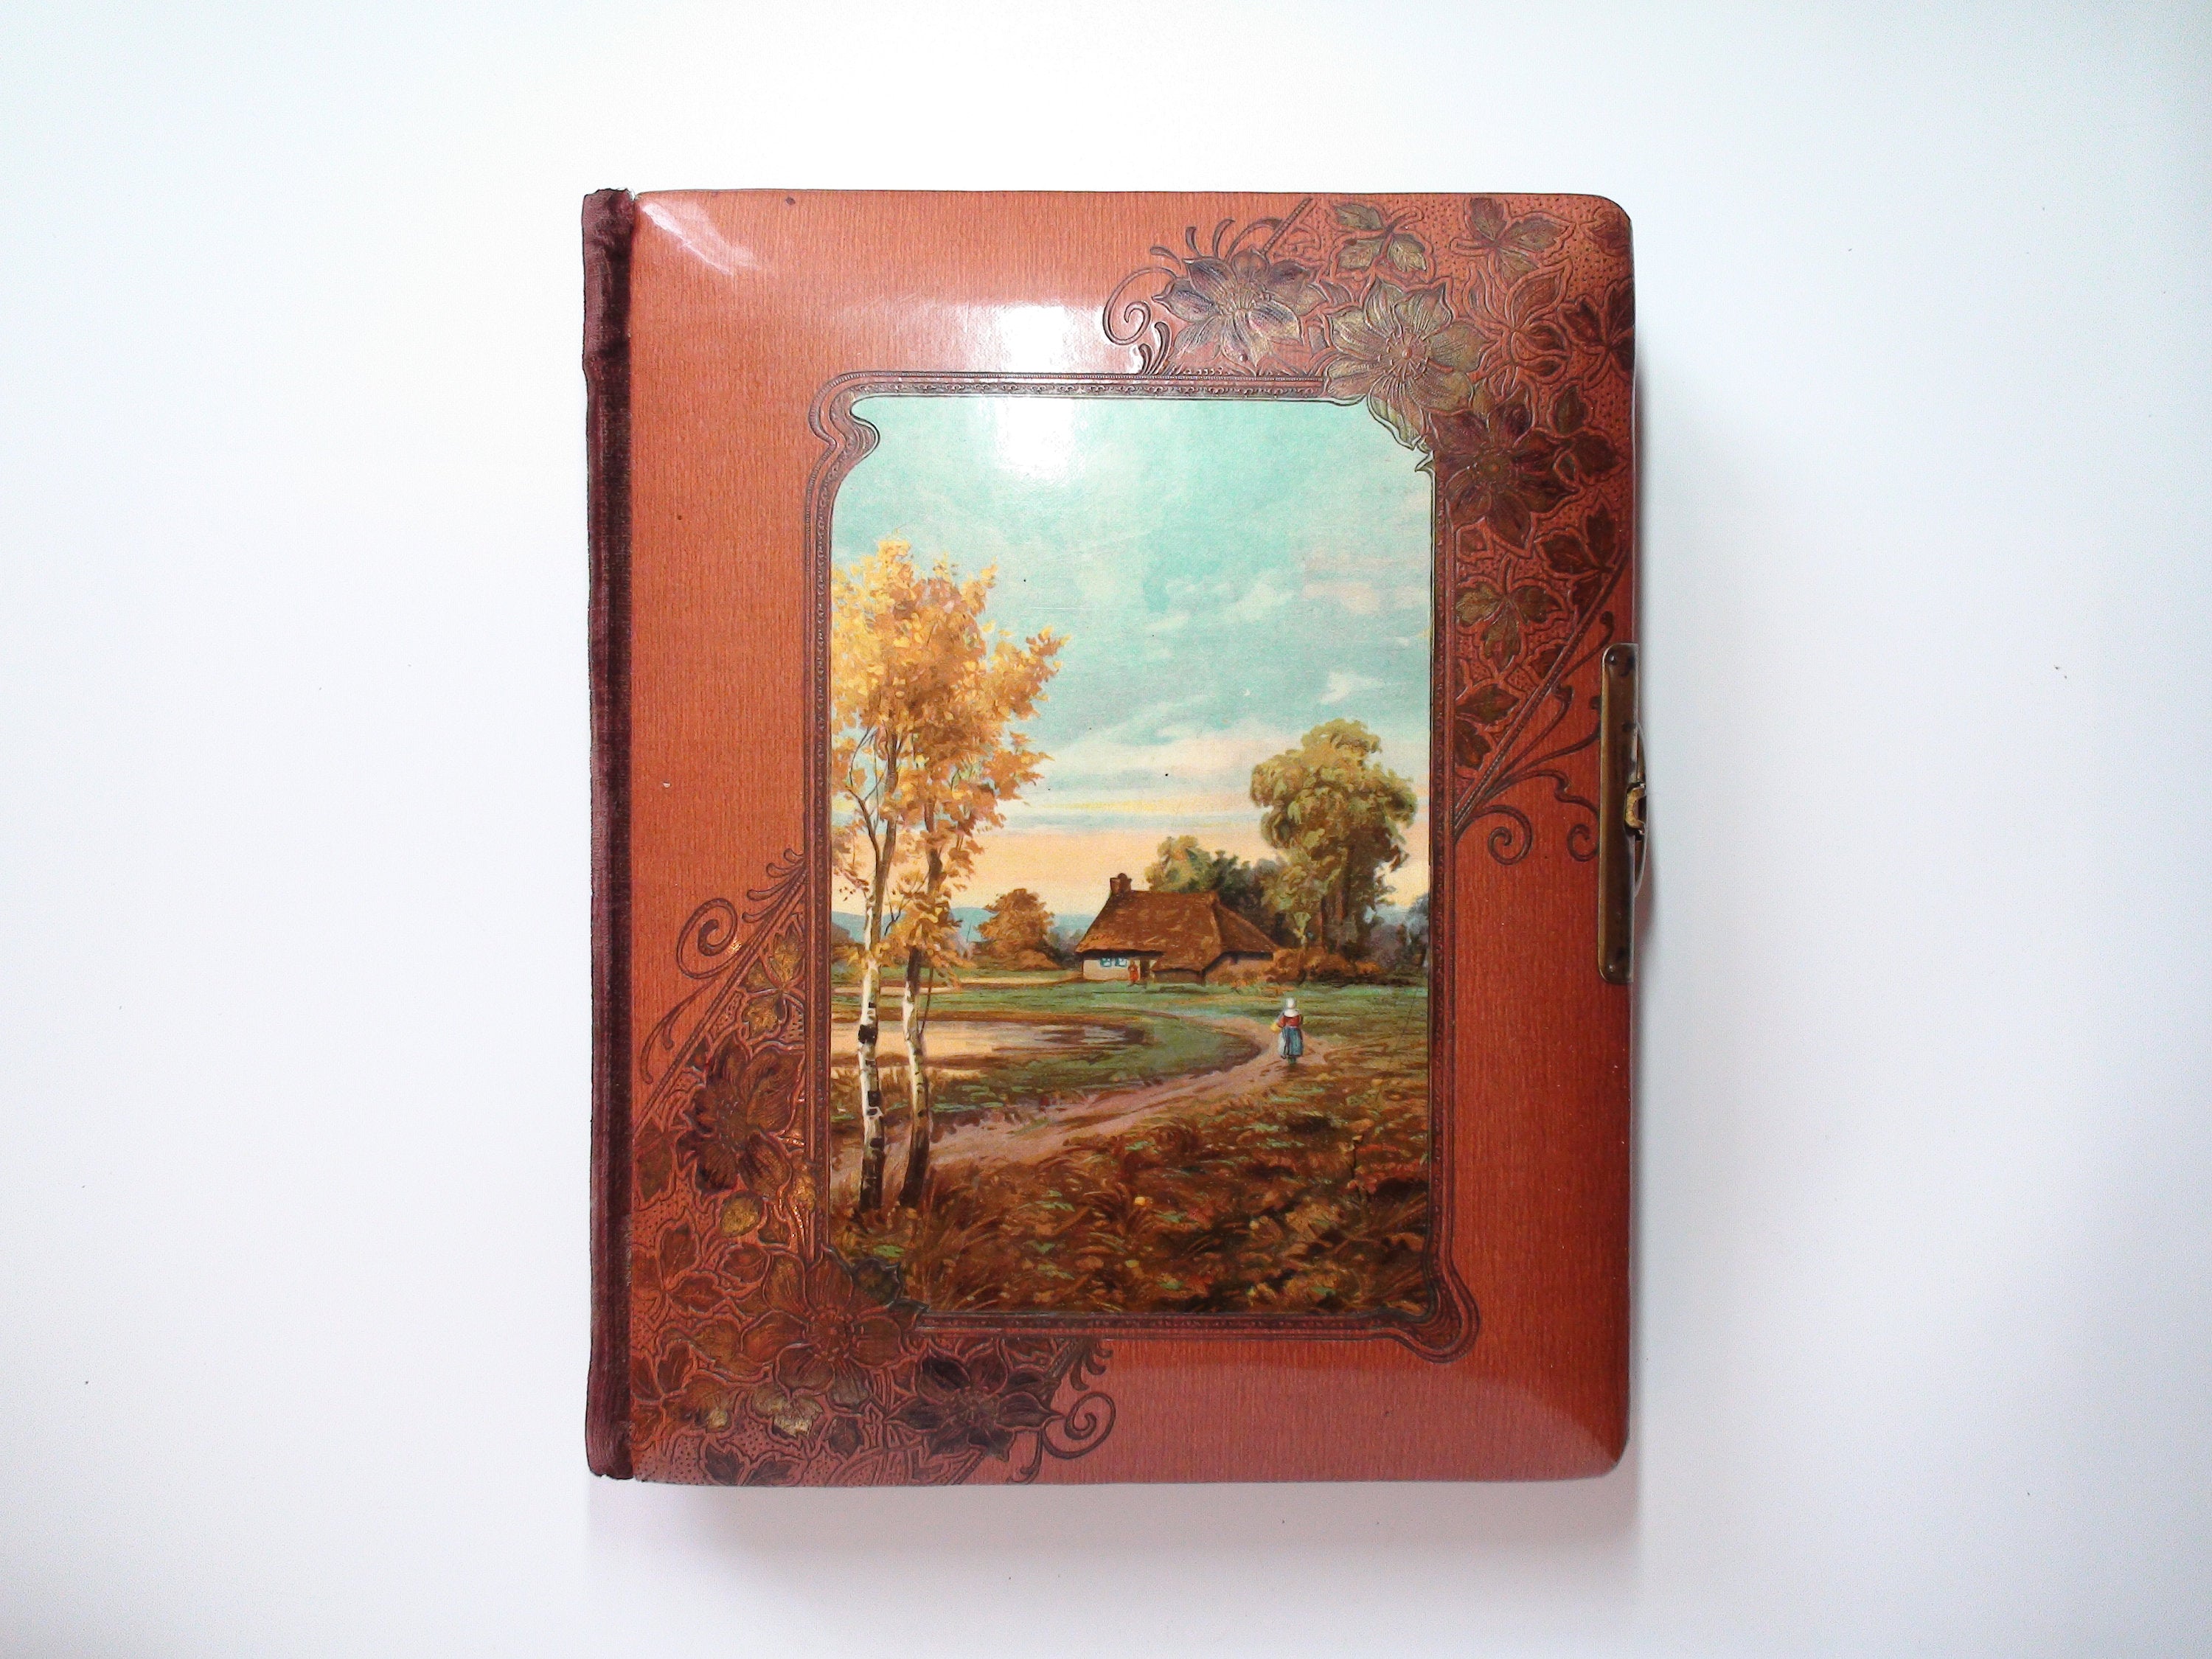 Antique Victorian Photo Album with Country Scene and Working Ornate Clasp, Includes Two Photographs, c1880s